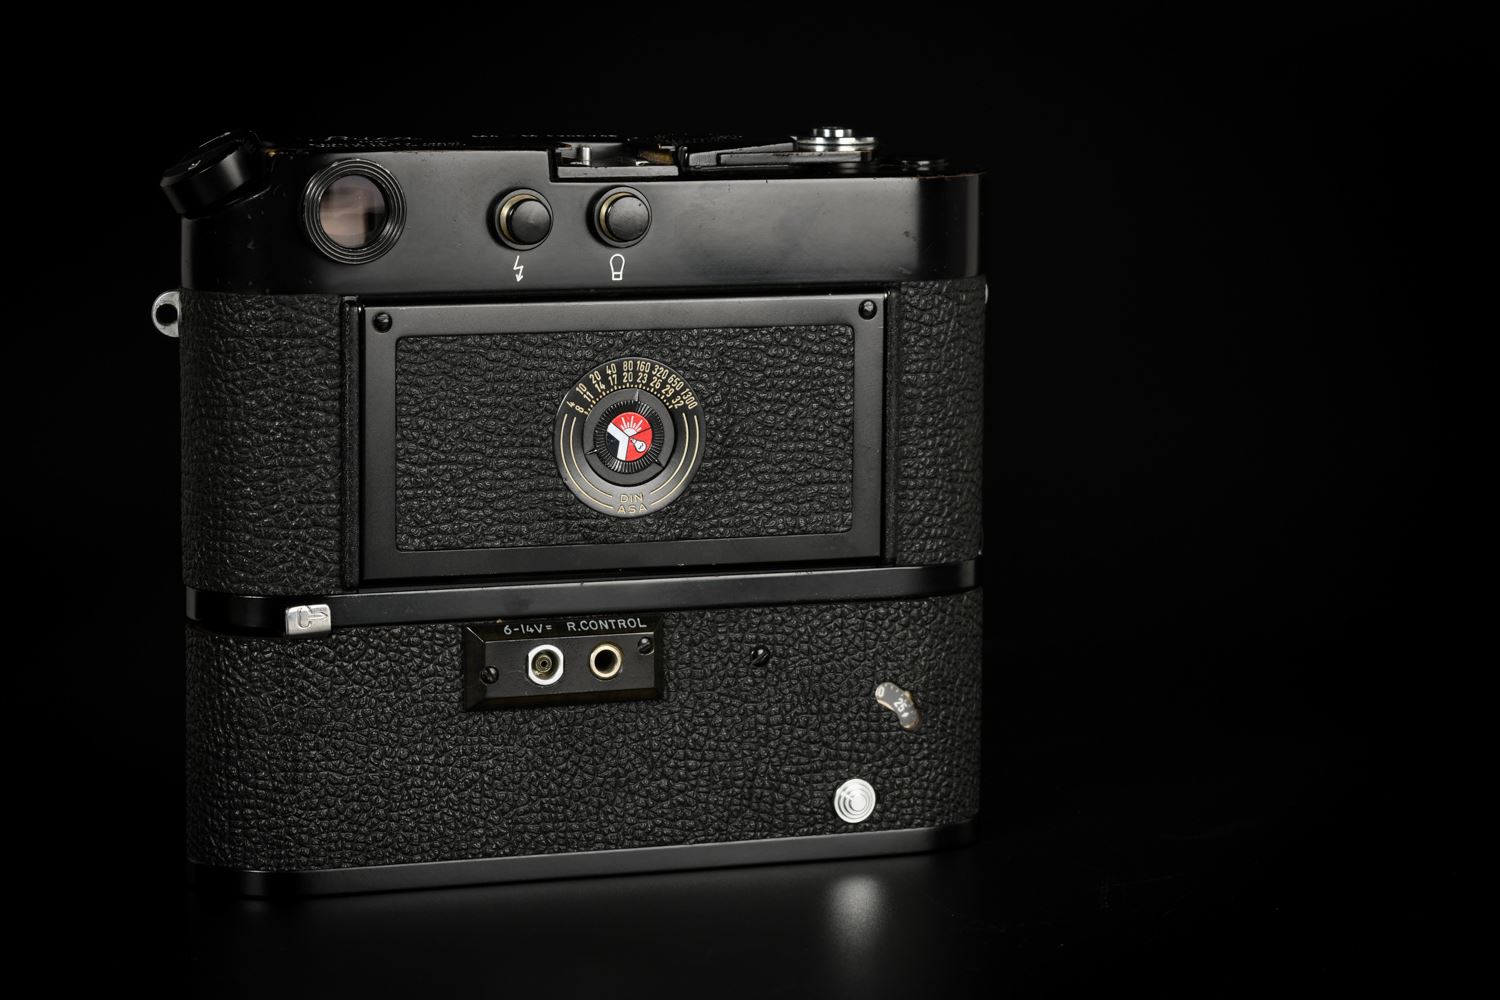 Picture of Leica M4-M Black Paint with New York Motordrive and Power Pack